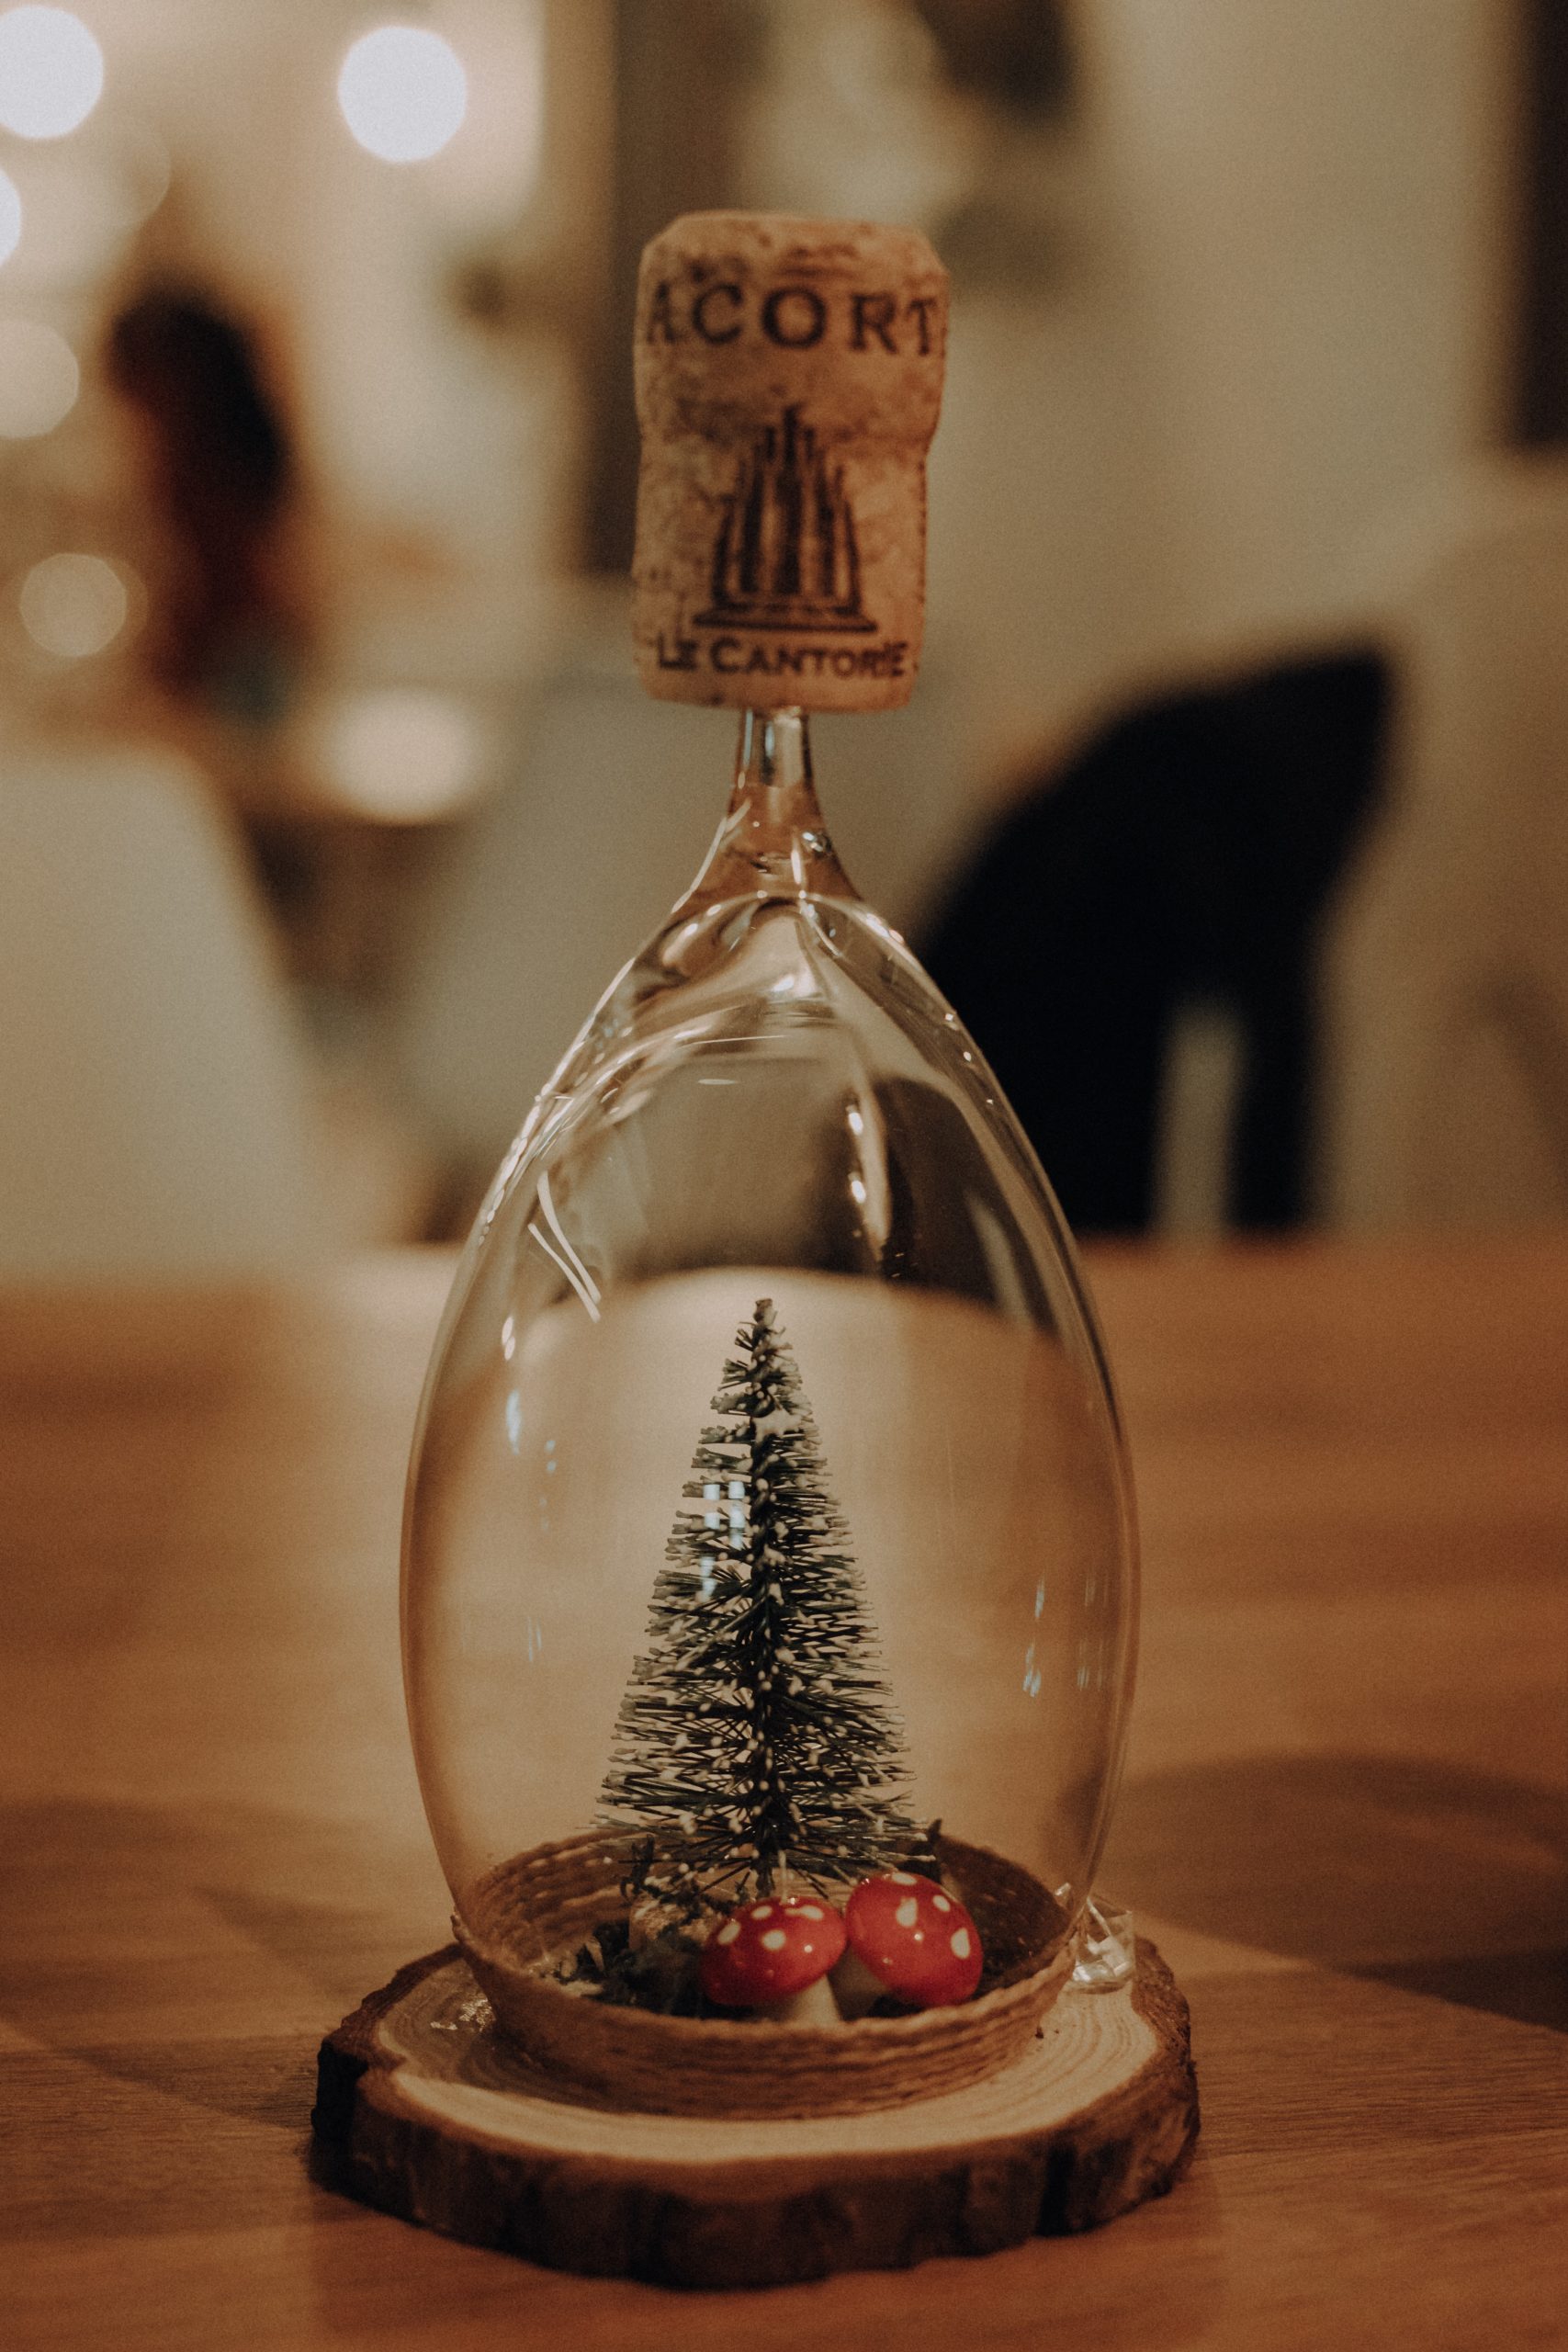 Am upside-down glass with a tiny Christmas tree in it.